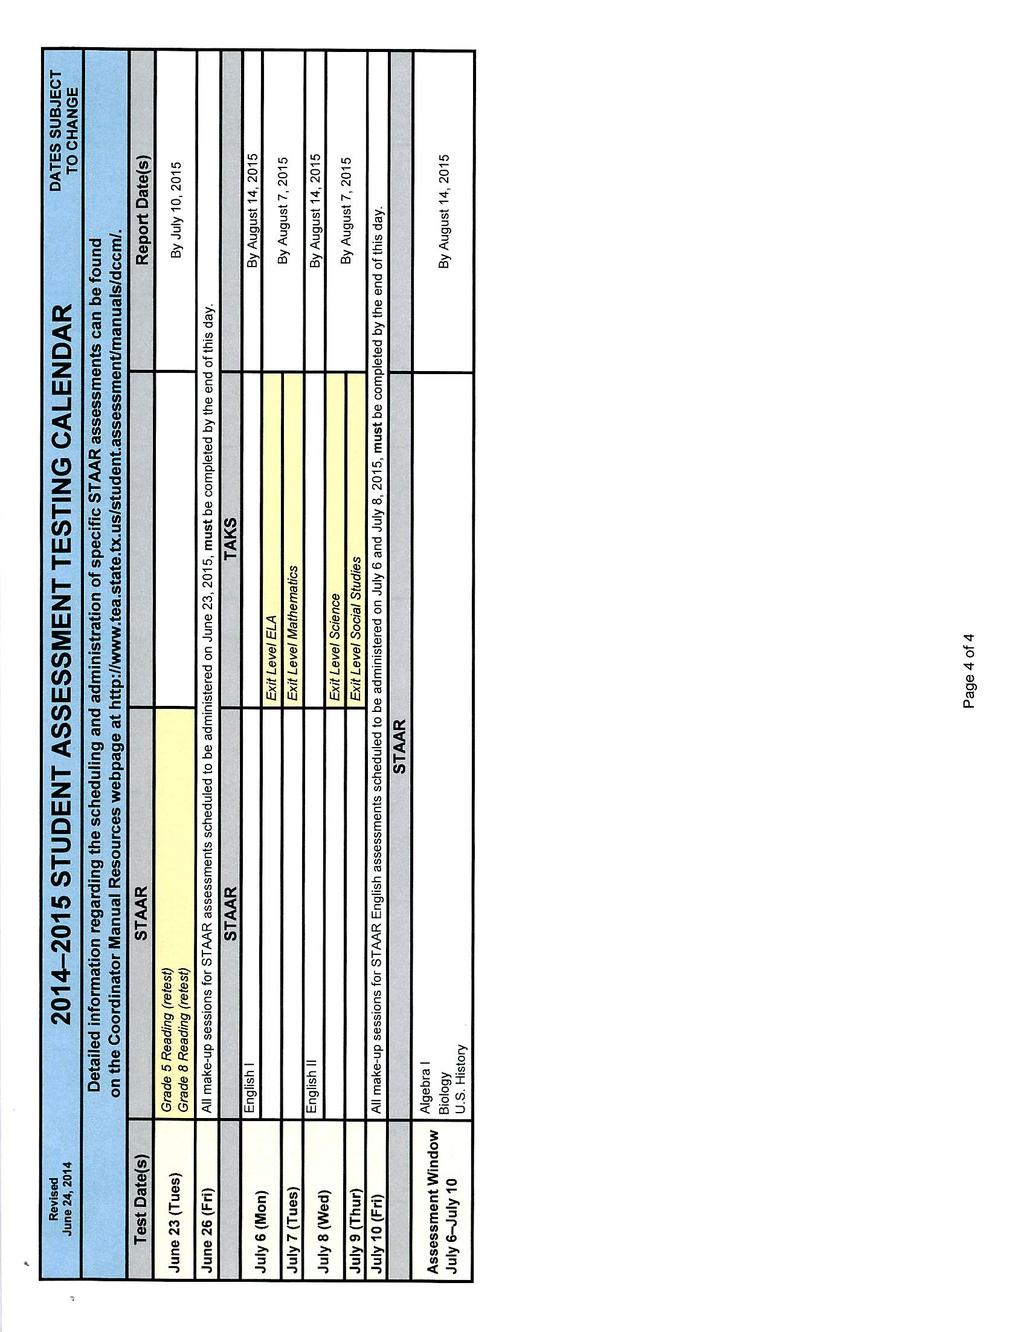 jun'jsao«2014-2015 STUDENT ASSESSMENT TESTING CALENDAR "'VocHANGf^ Detailed information regarding the sciieduling and administration of specific assessments can be found on the Coordinator IVIanual